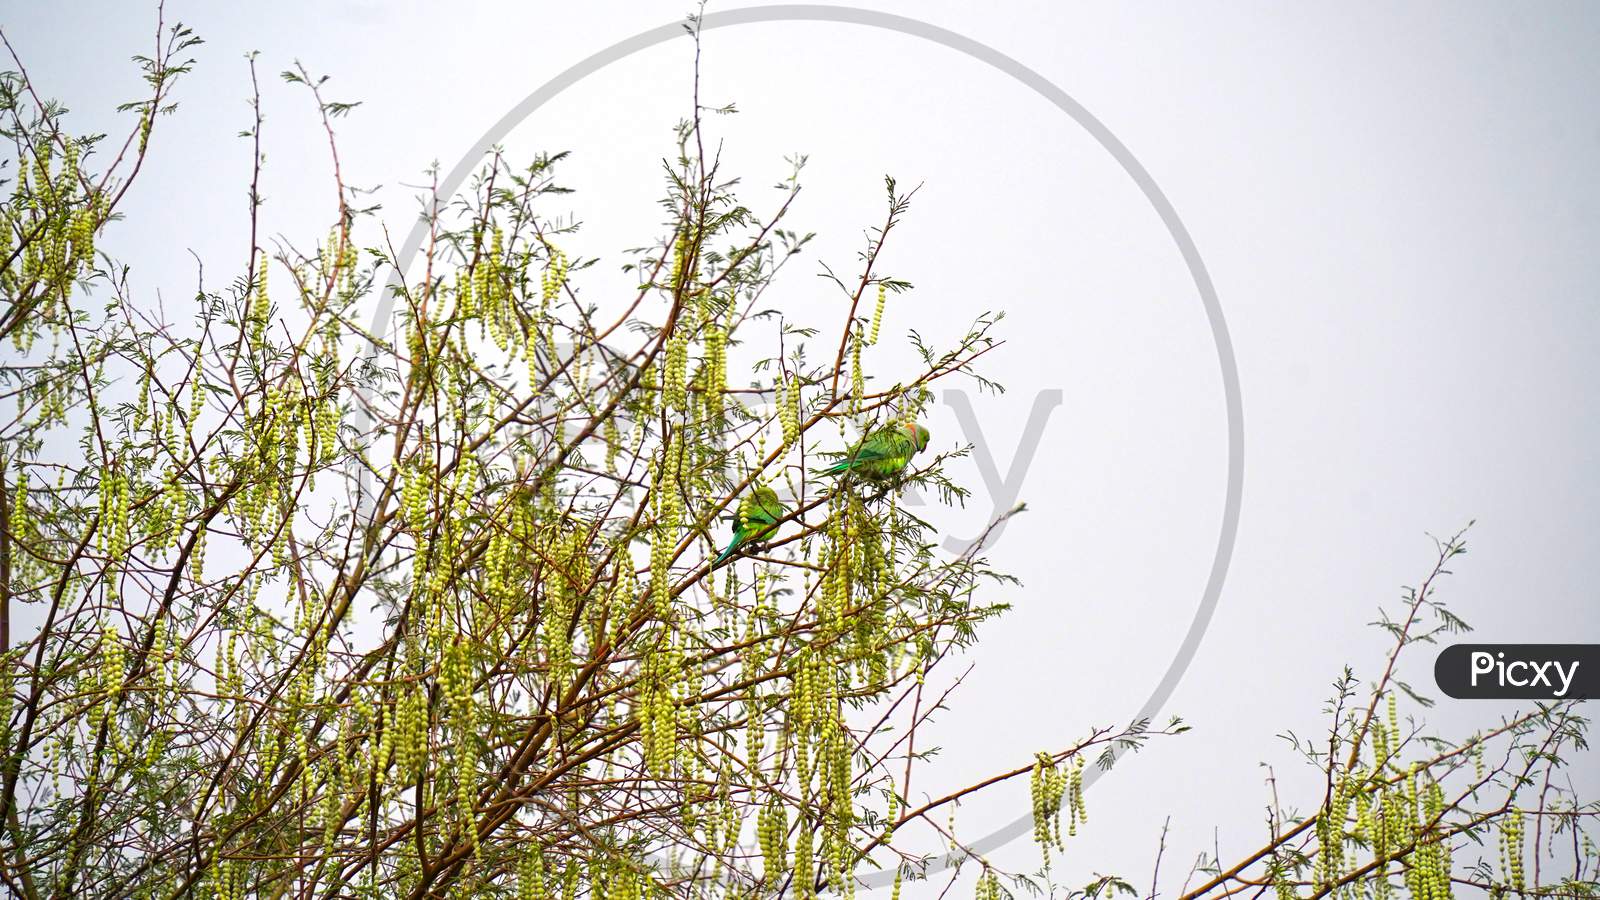 Parrots Eating Acacia Hanging Ripe Pods Or Bean. Round Pods Or Beans Of Acacia Or Babool Tree Leaves With Blue Sky Background.